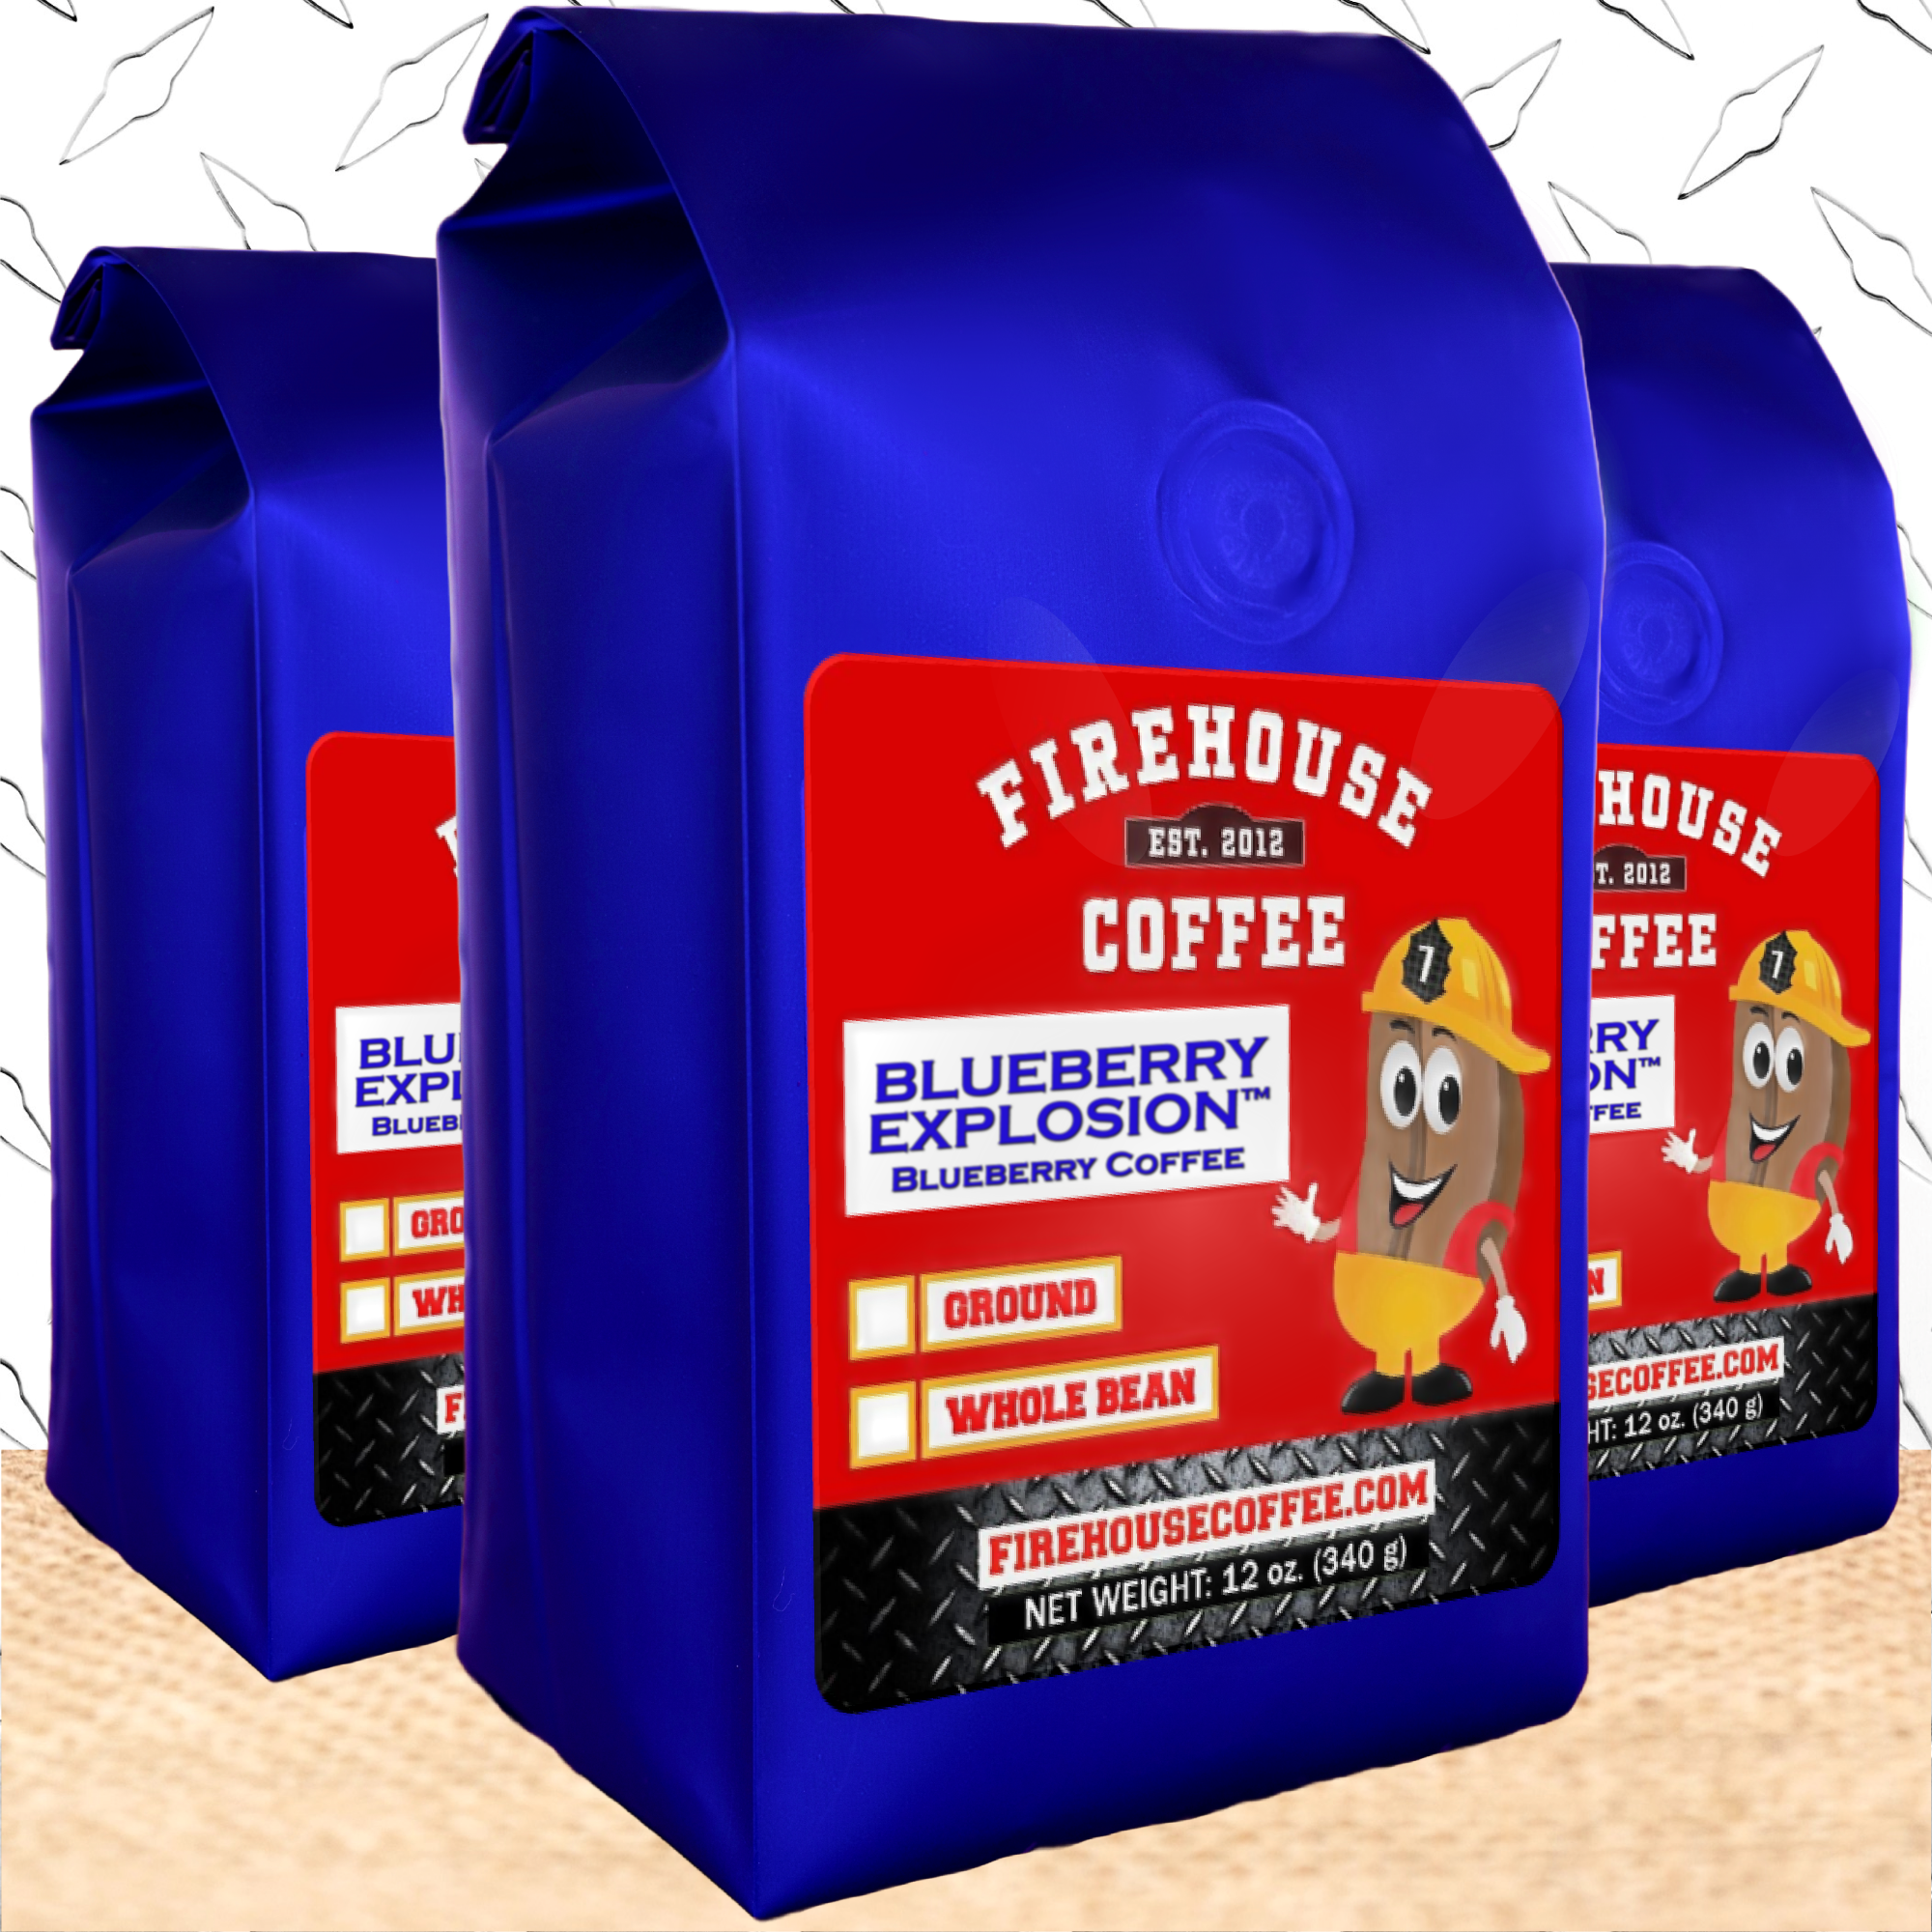 12 oz bags of Blueberry Coffee